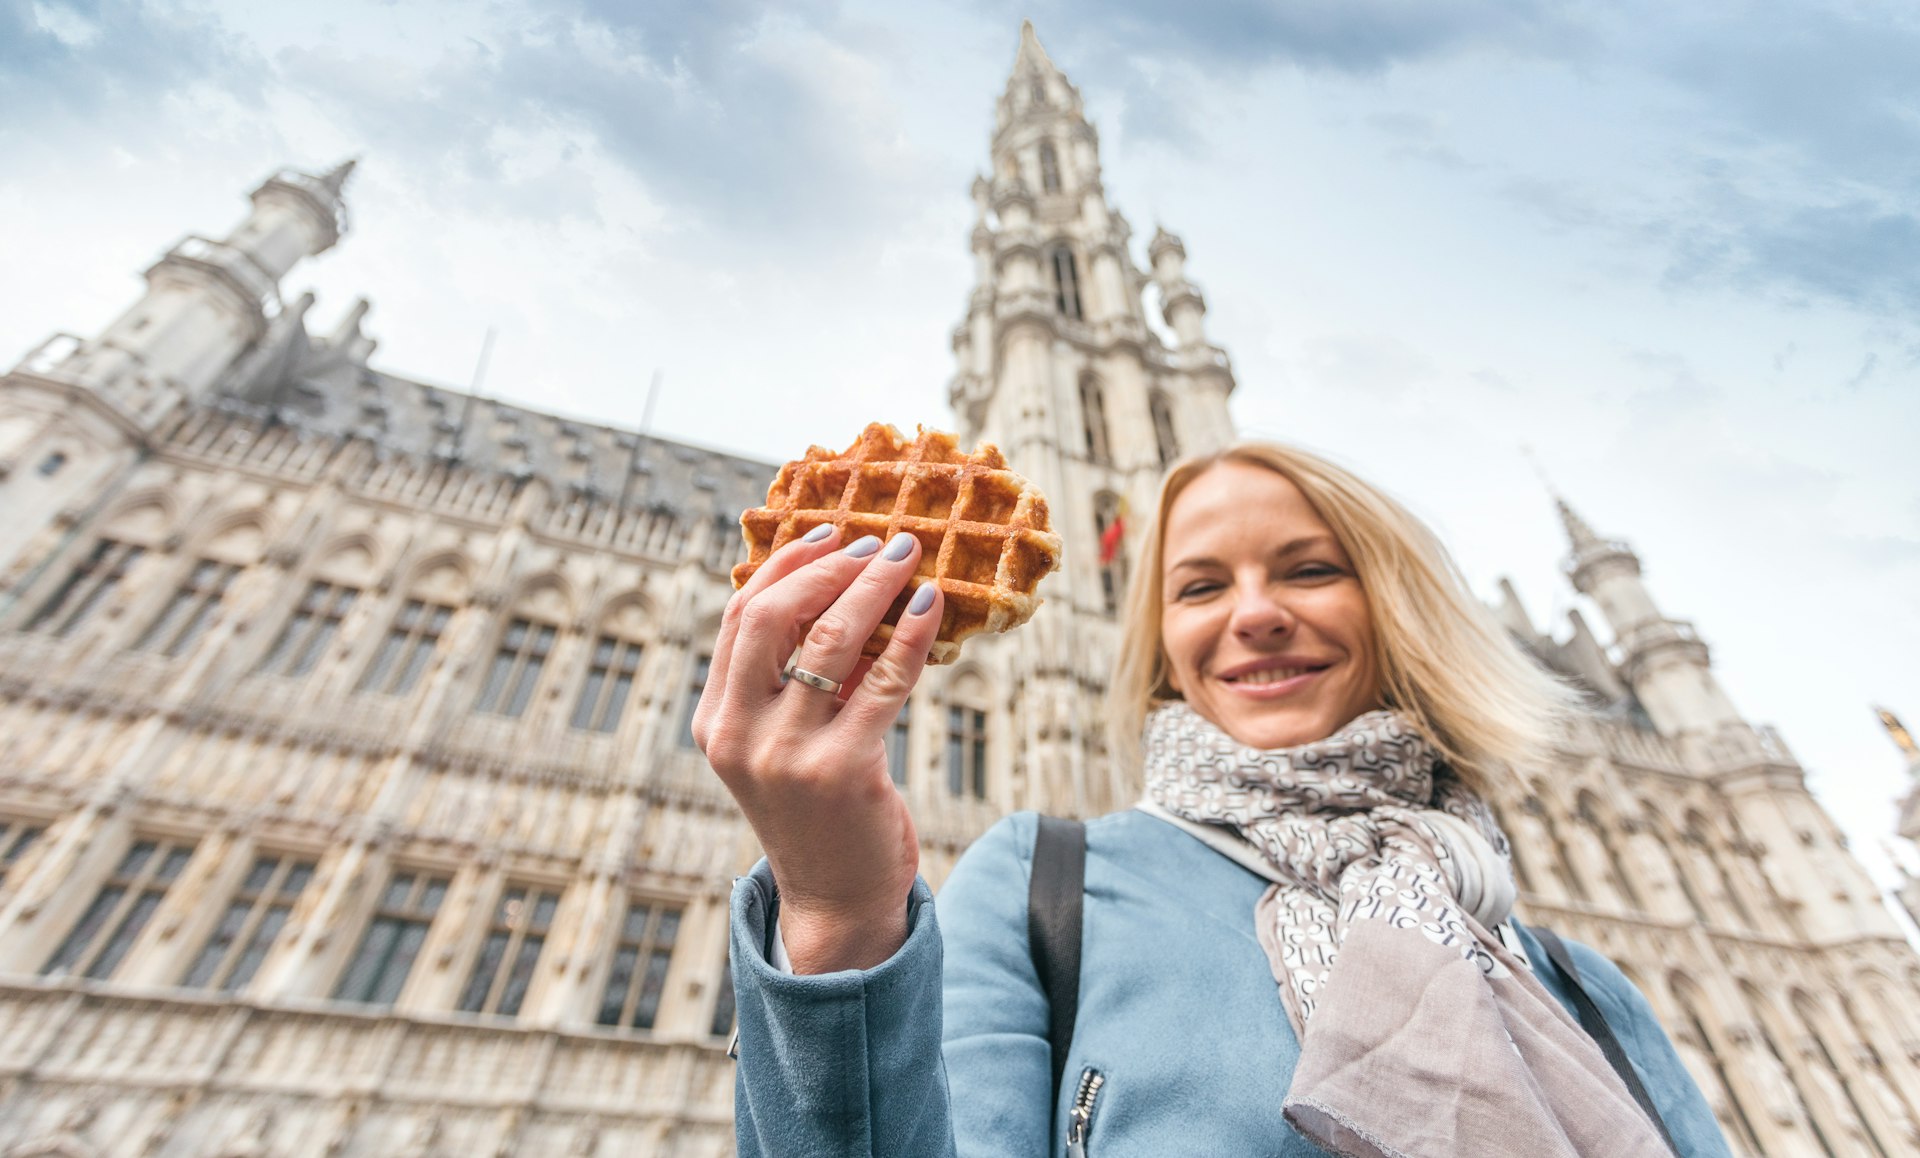 Young woman holds out a traditional Belgian waffle against the background of Grand-Place, Brussels, Belgium